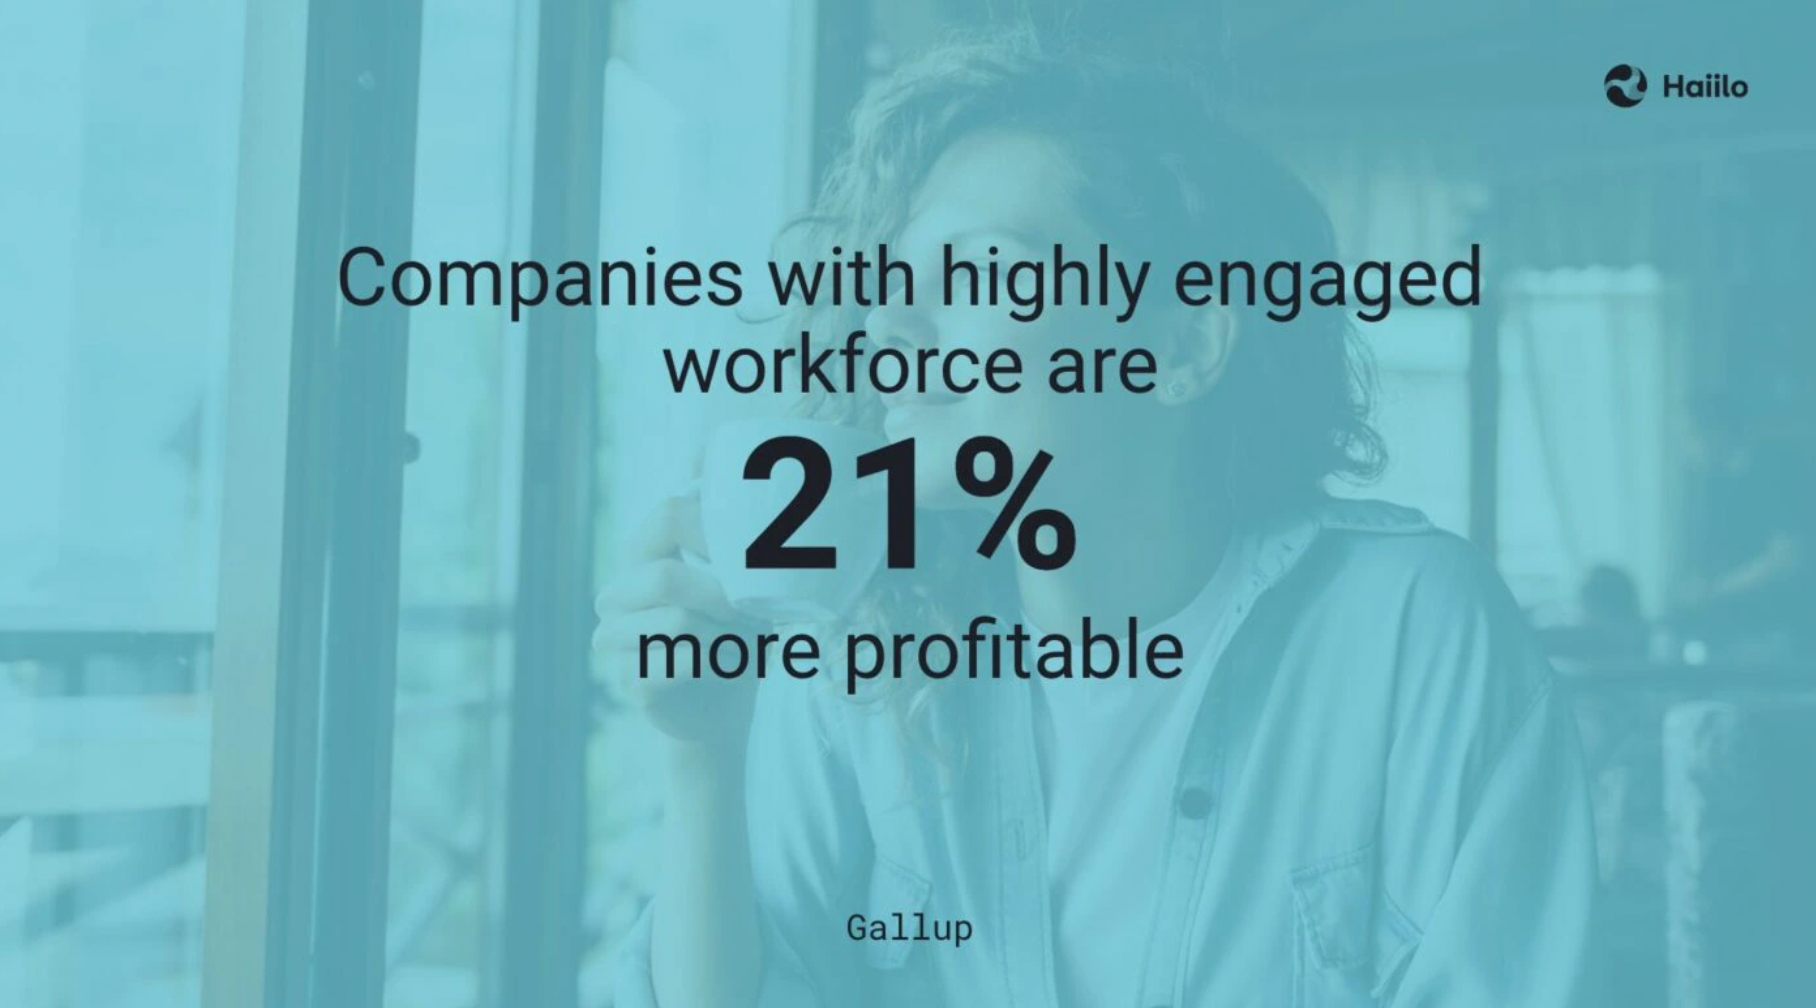 graphic highlighting statistic that says companies with high employee engagement are 21% more profitable